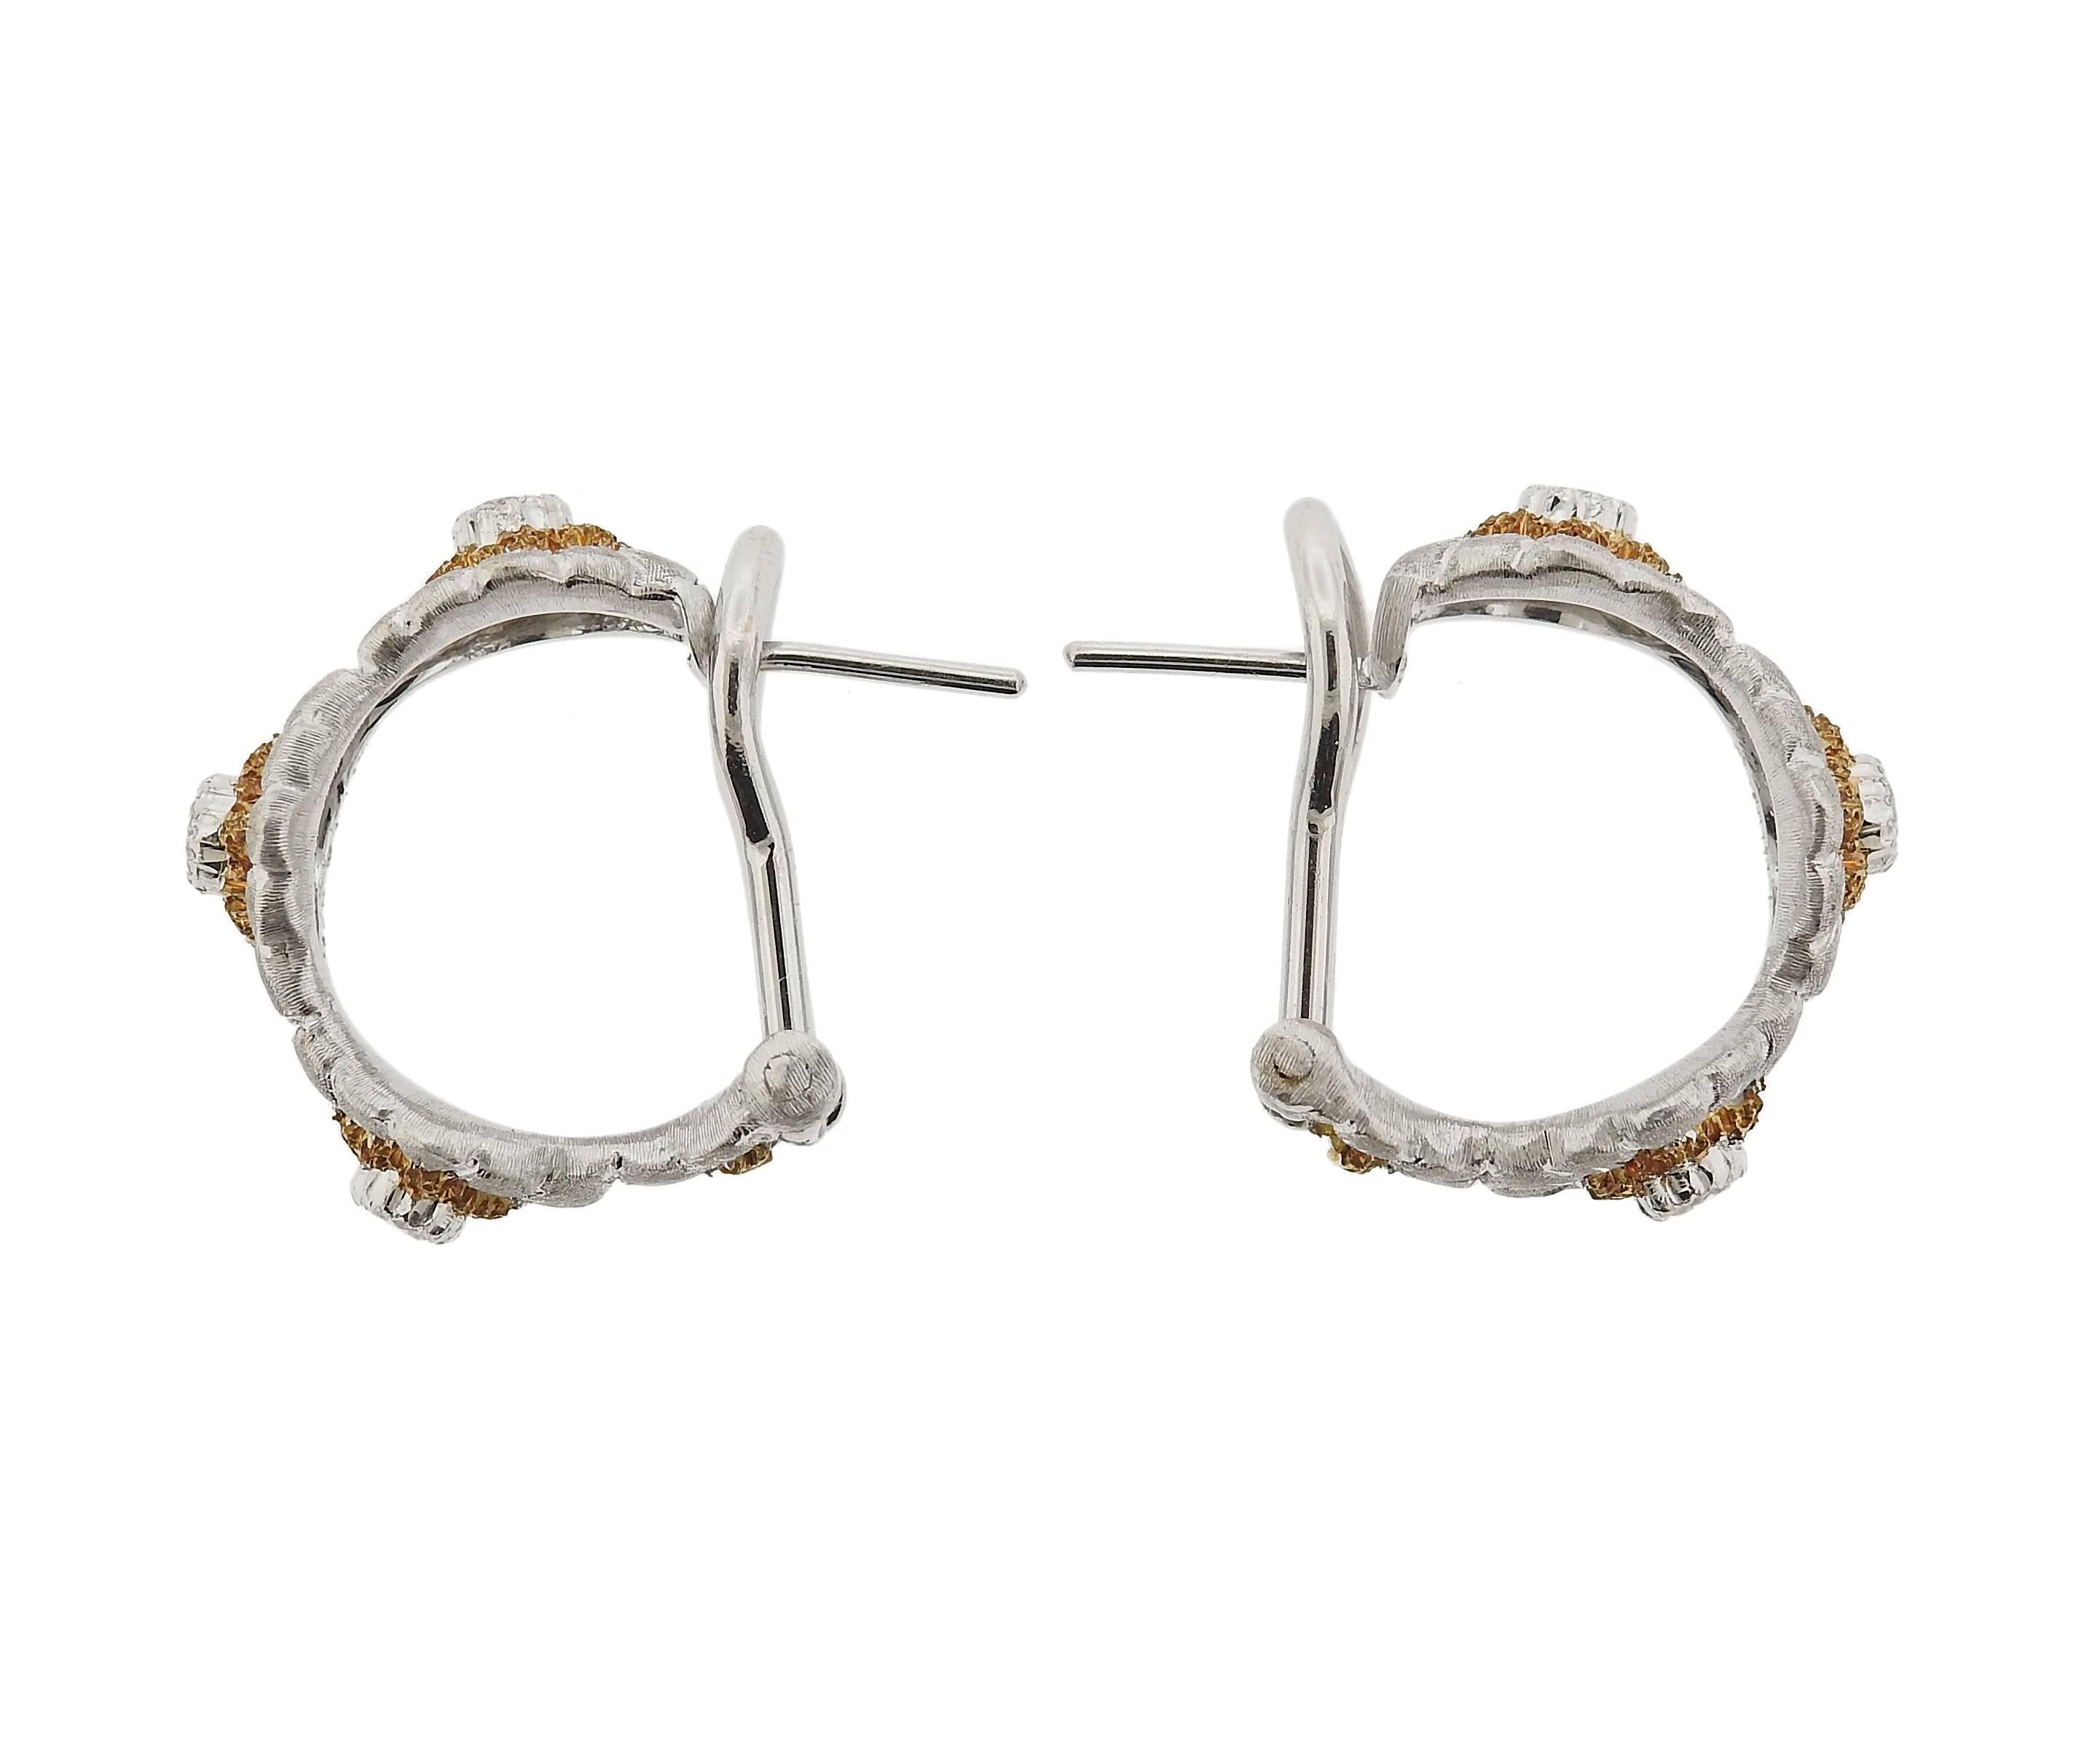 A pair of delicate flower hoop earrings. crafted by Buccellati, set in 18k yellow and white gold, with approximately 0.36ctw in diamonds. Earrings are 20mm in diameter, and 10mm wide, weigh 11.9 grams. Marked: Buccellati, 750,18k, Italy,